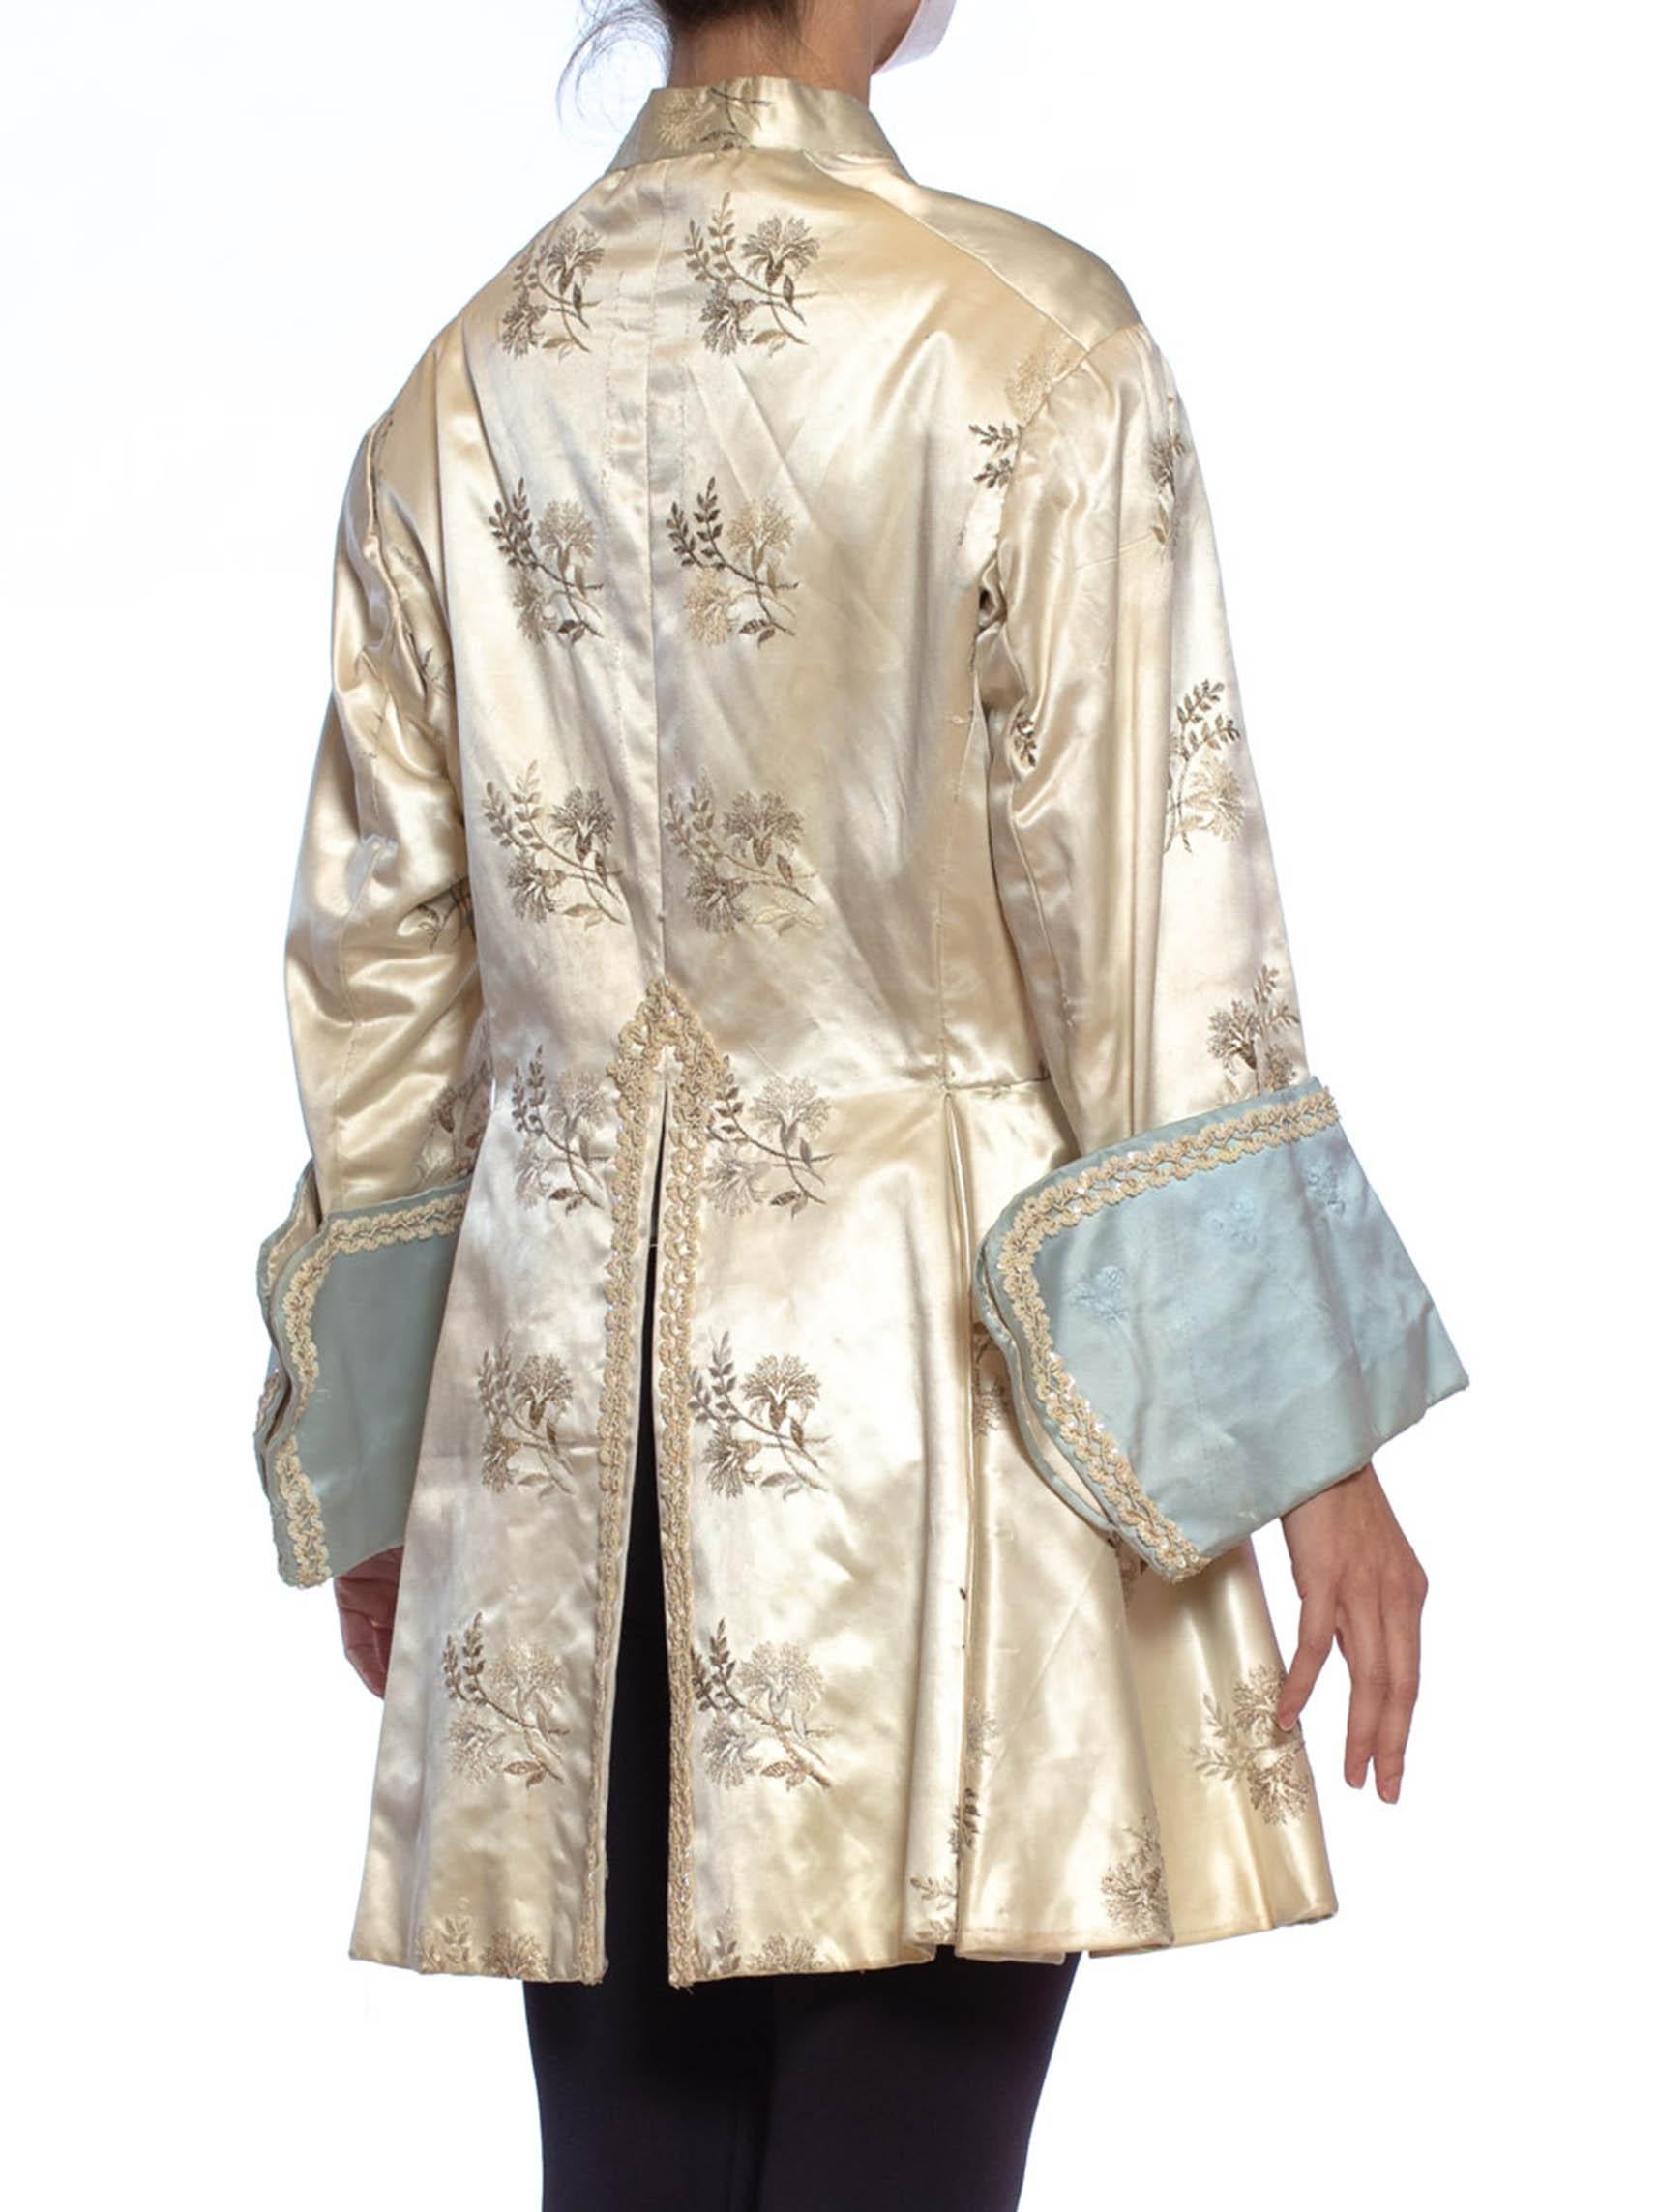 1940S White Rayon Satin Men's Floral Embroidered Frock Coat Jacket From France For Sale 2